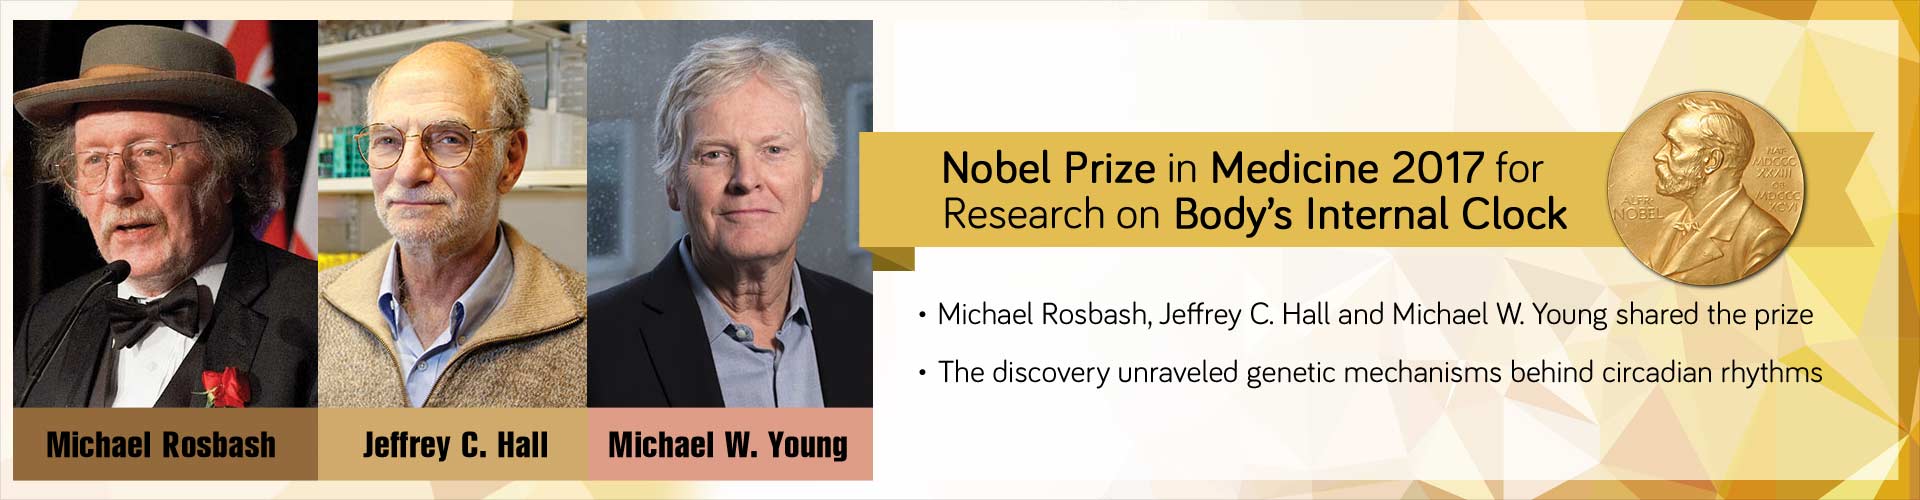 Nobel Prize in Medicine 2017 for Research on Body's Internal Clock
- Michael Rosbash, Jeffrey C. Hall and Michael W. Young shared the prize
- The discovery unraveled genetic mechanisms behind circadian rhythms